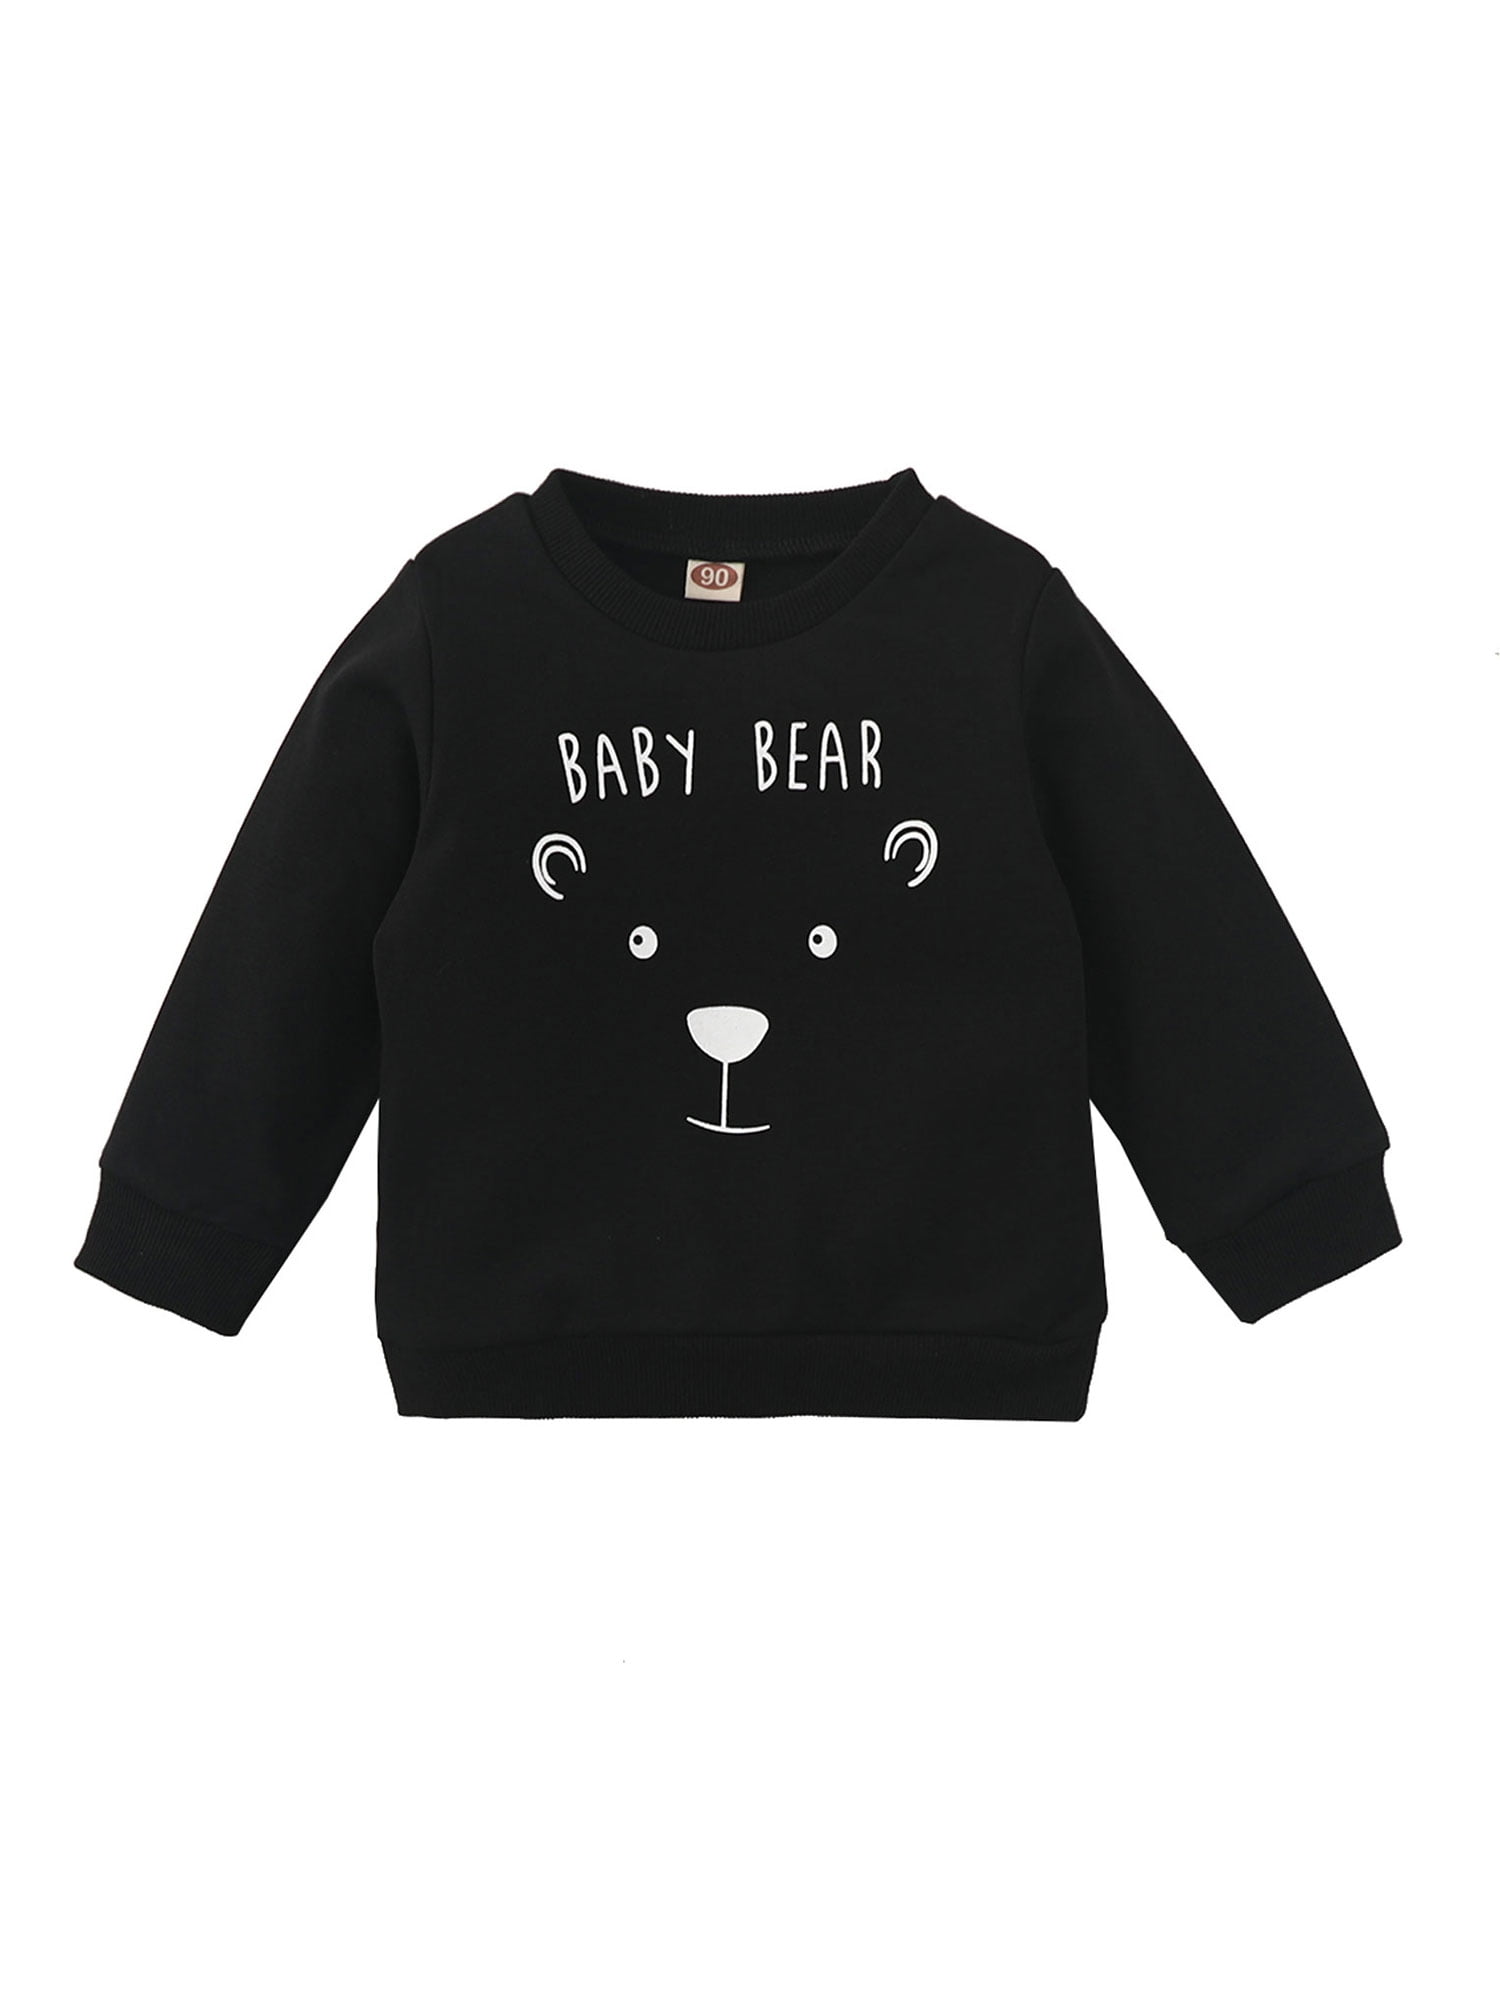 Age :18-24 Months, Orange 1-5 Years old Baby Sweatershirt Tops Long Sleeves Cartoon Lovely Shirt Pullover Blouse Tunic Kids Clothes 